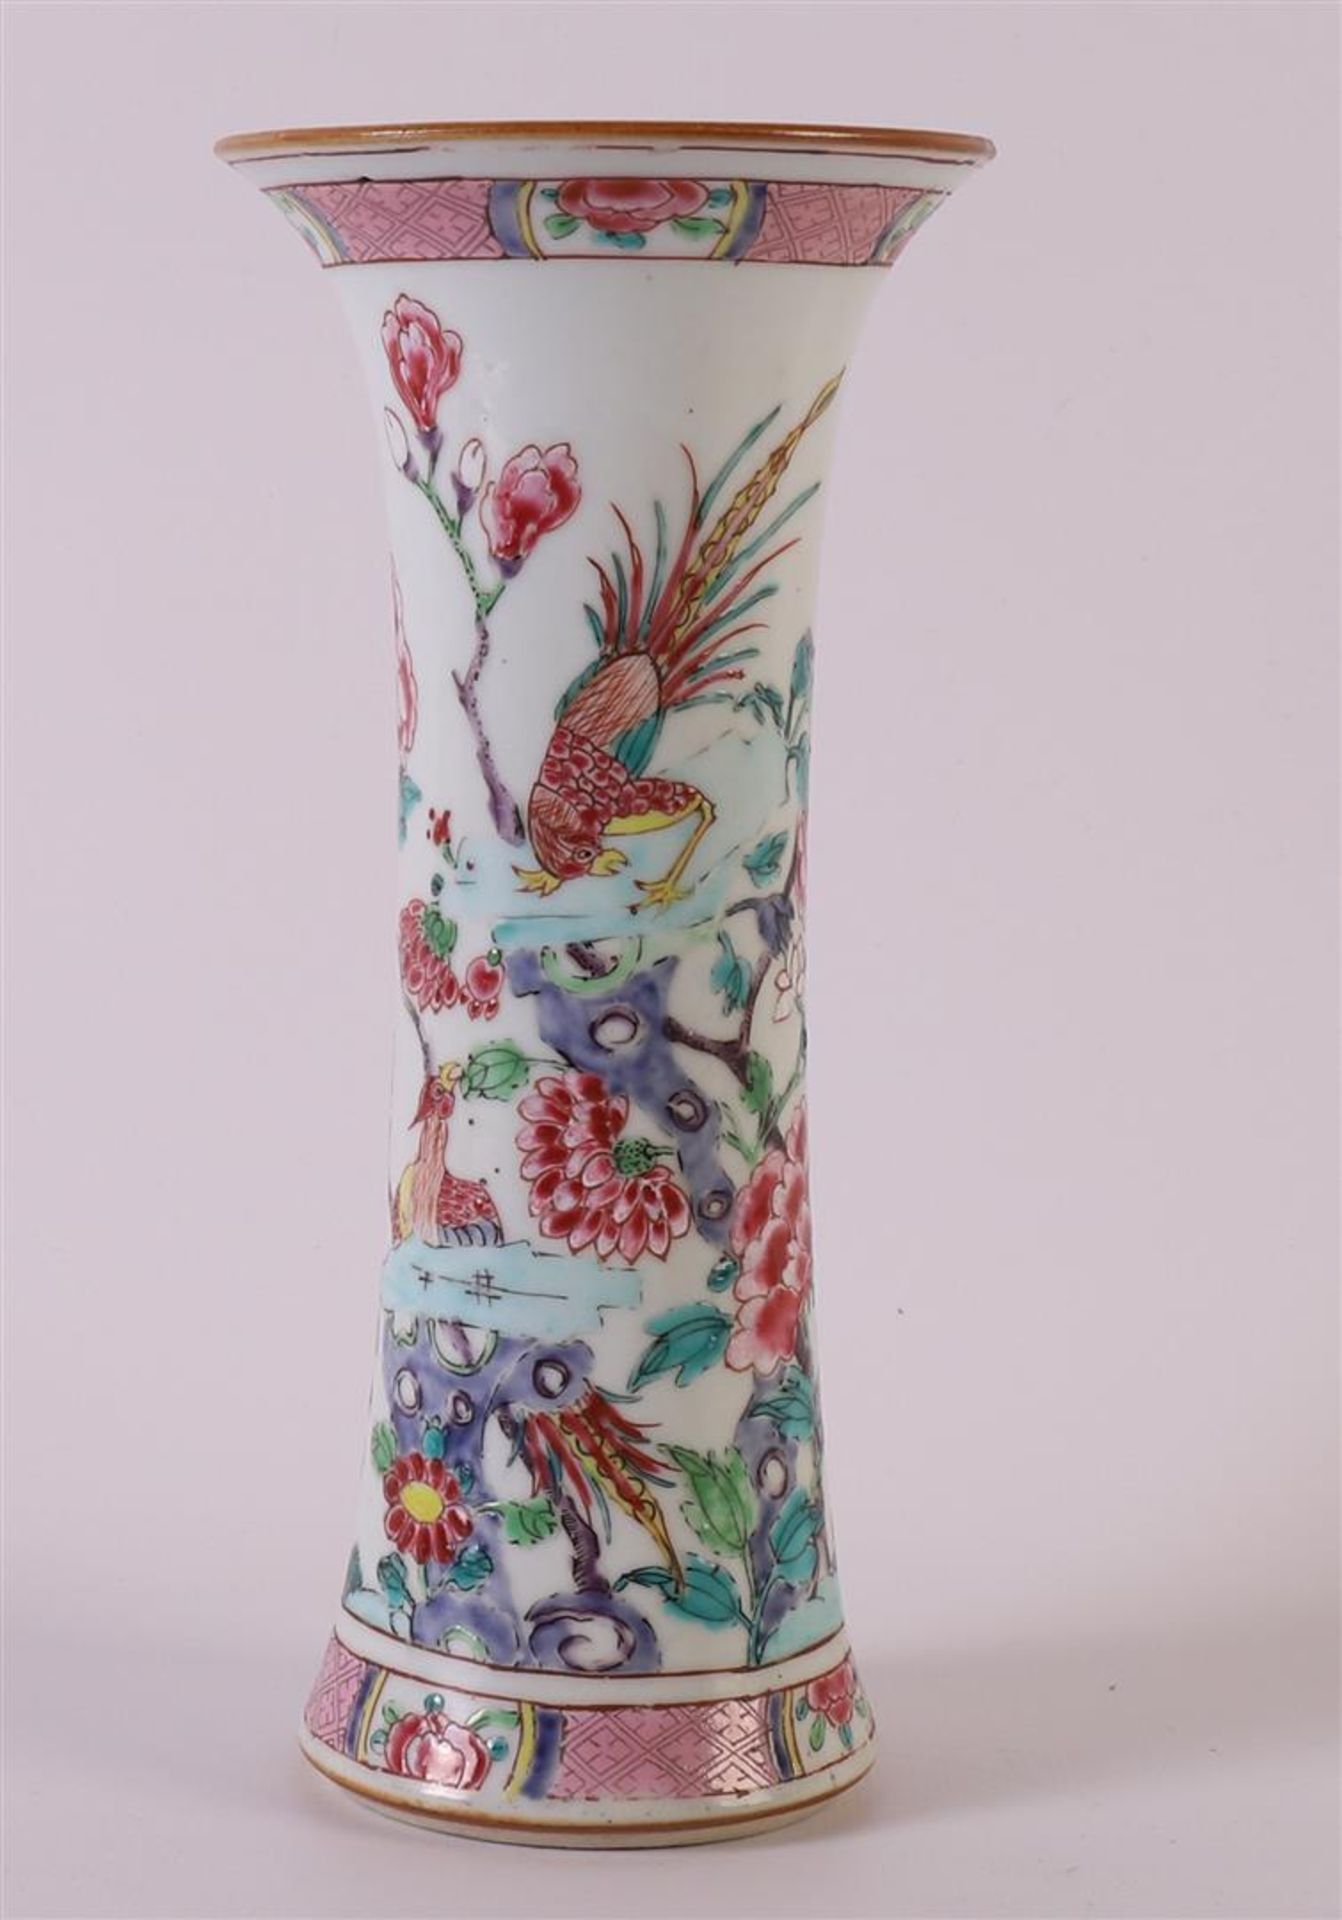 A trumpet-shaped porcelain famille rose vase, China, 18th century. Polychrome decor of birds and